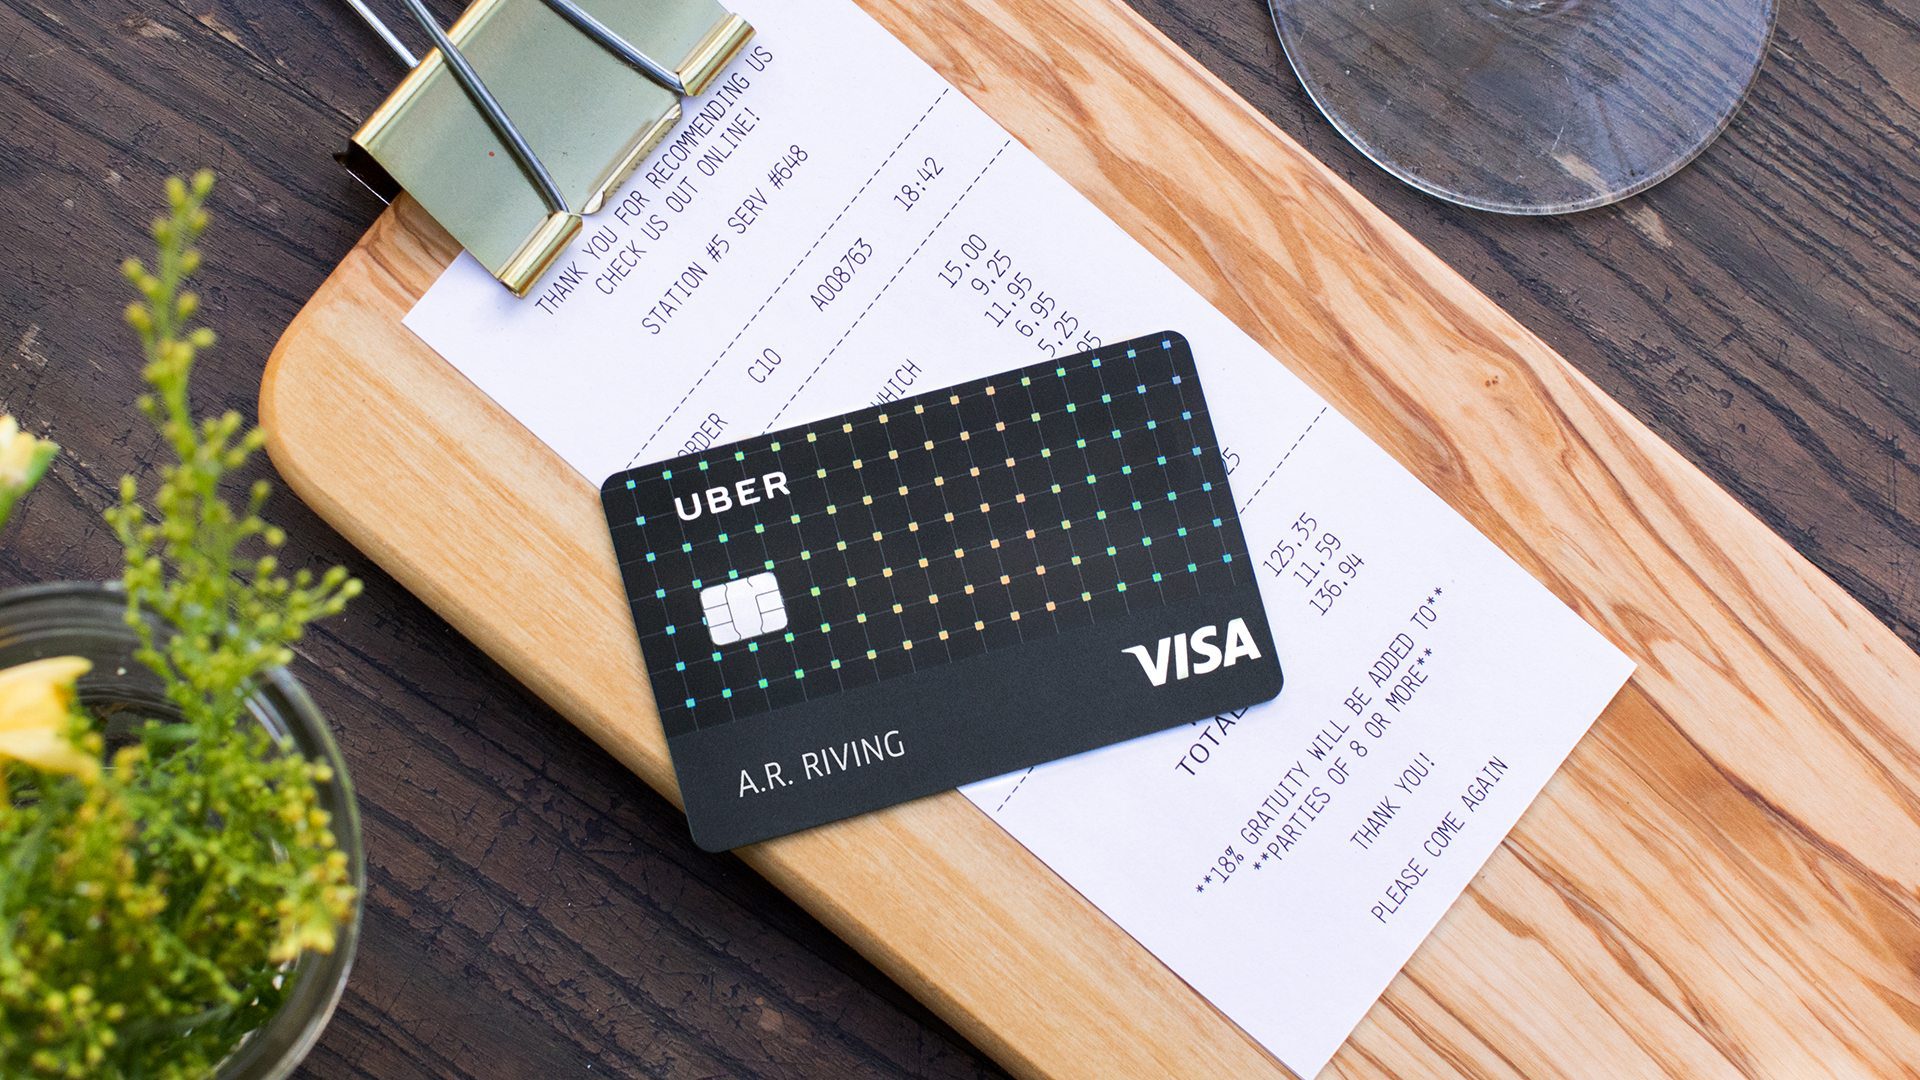 Uber's new credit card is pictured here. 